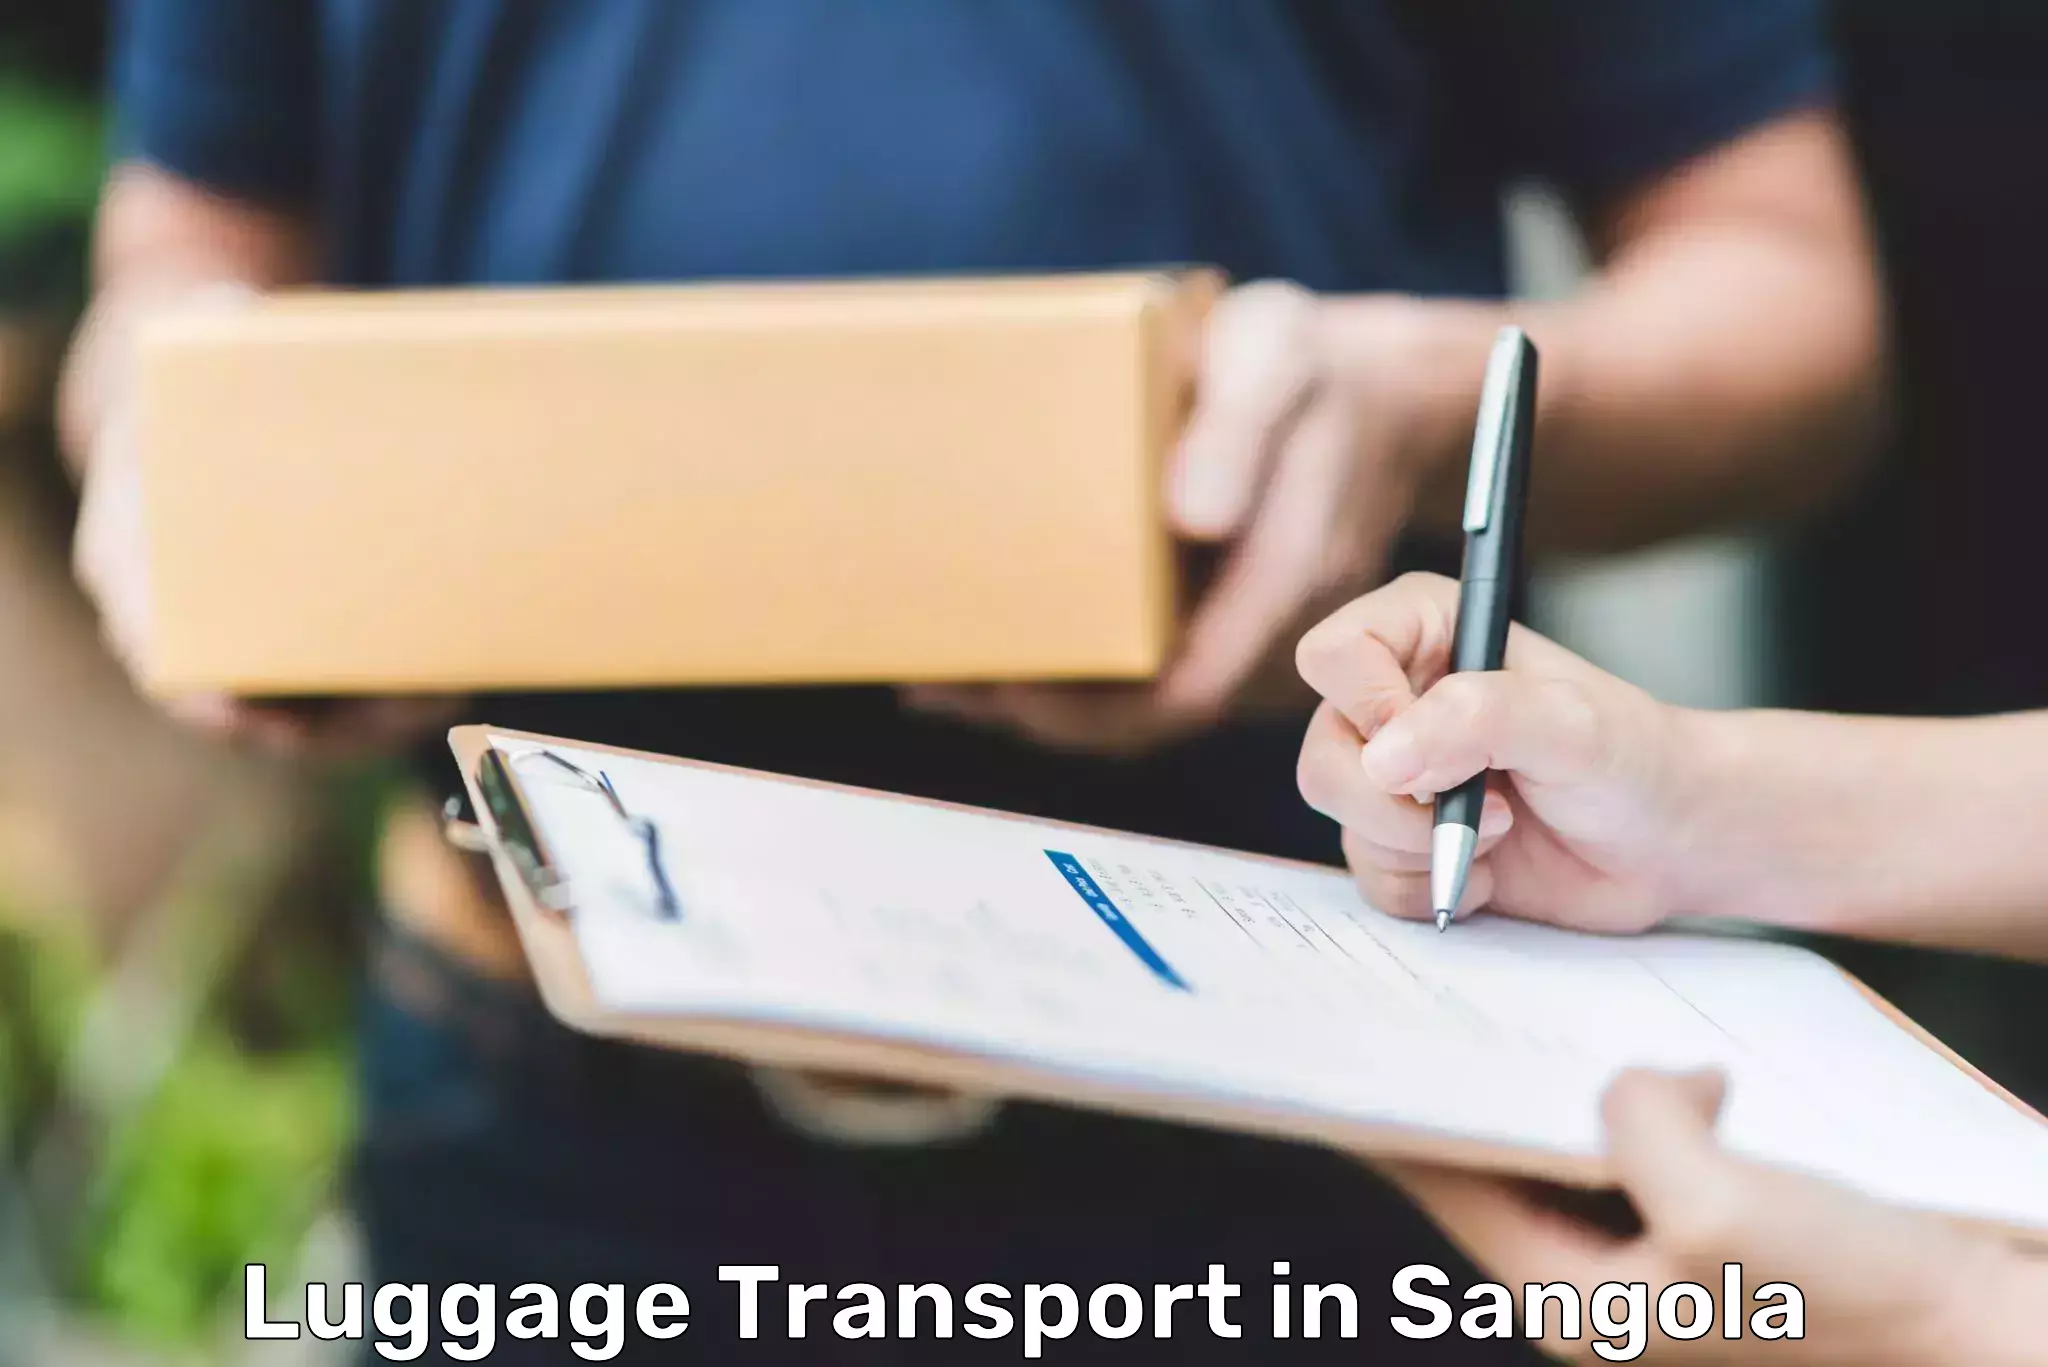 Luggage transport consultancy in Sangola